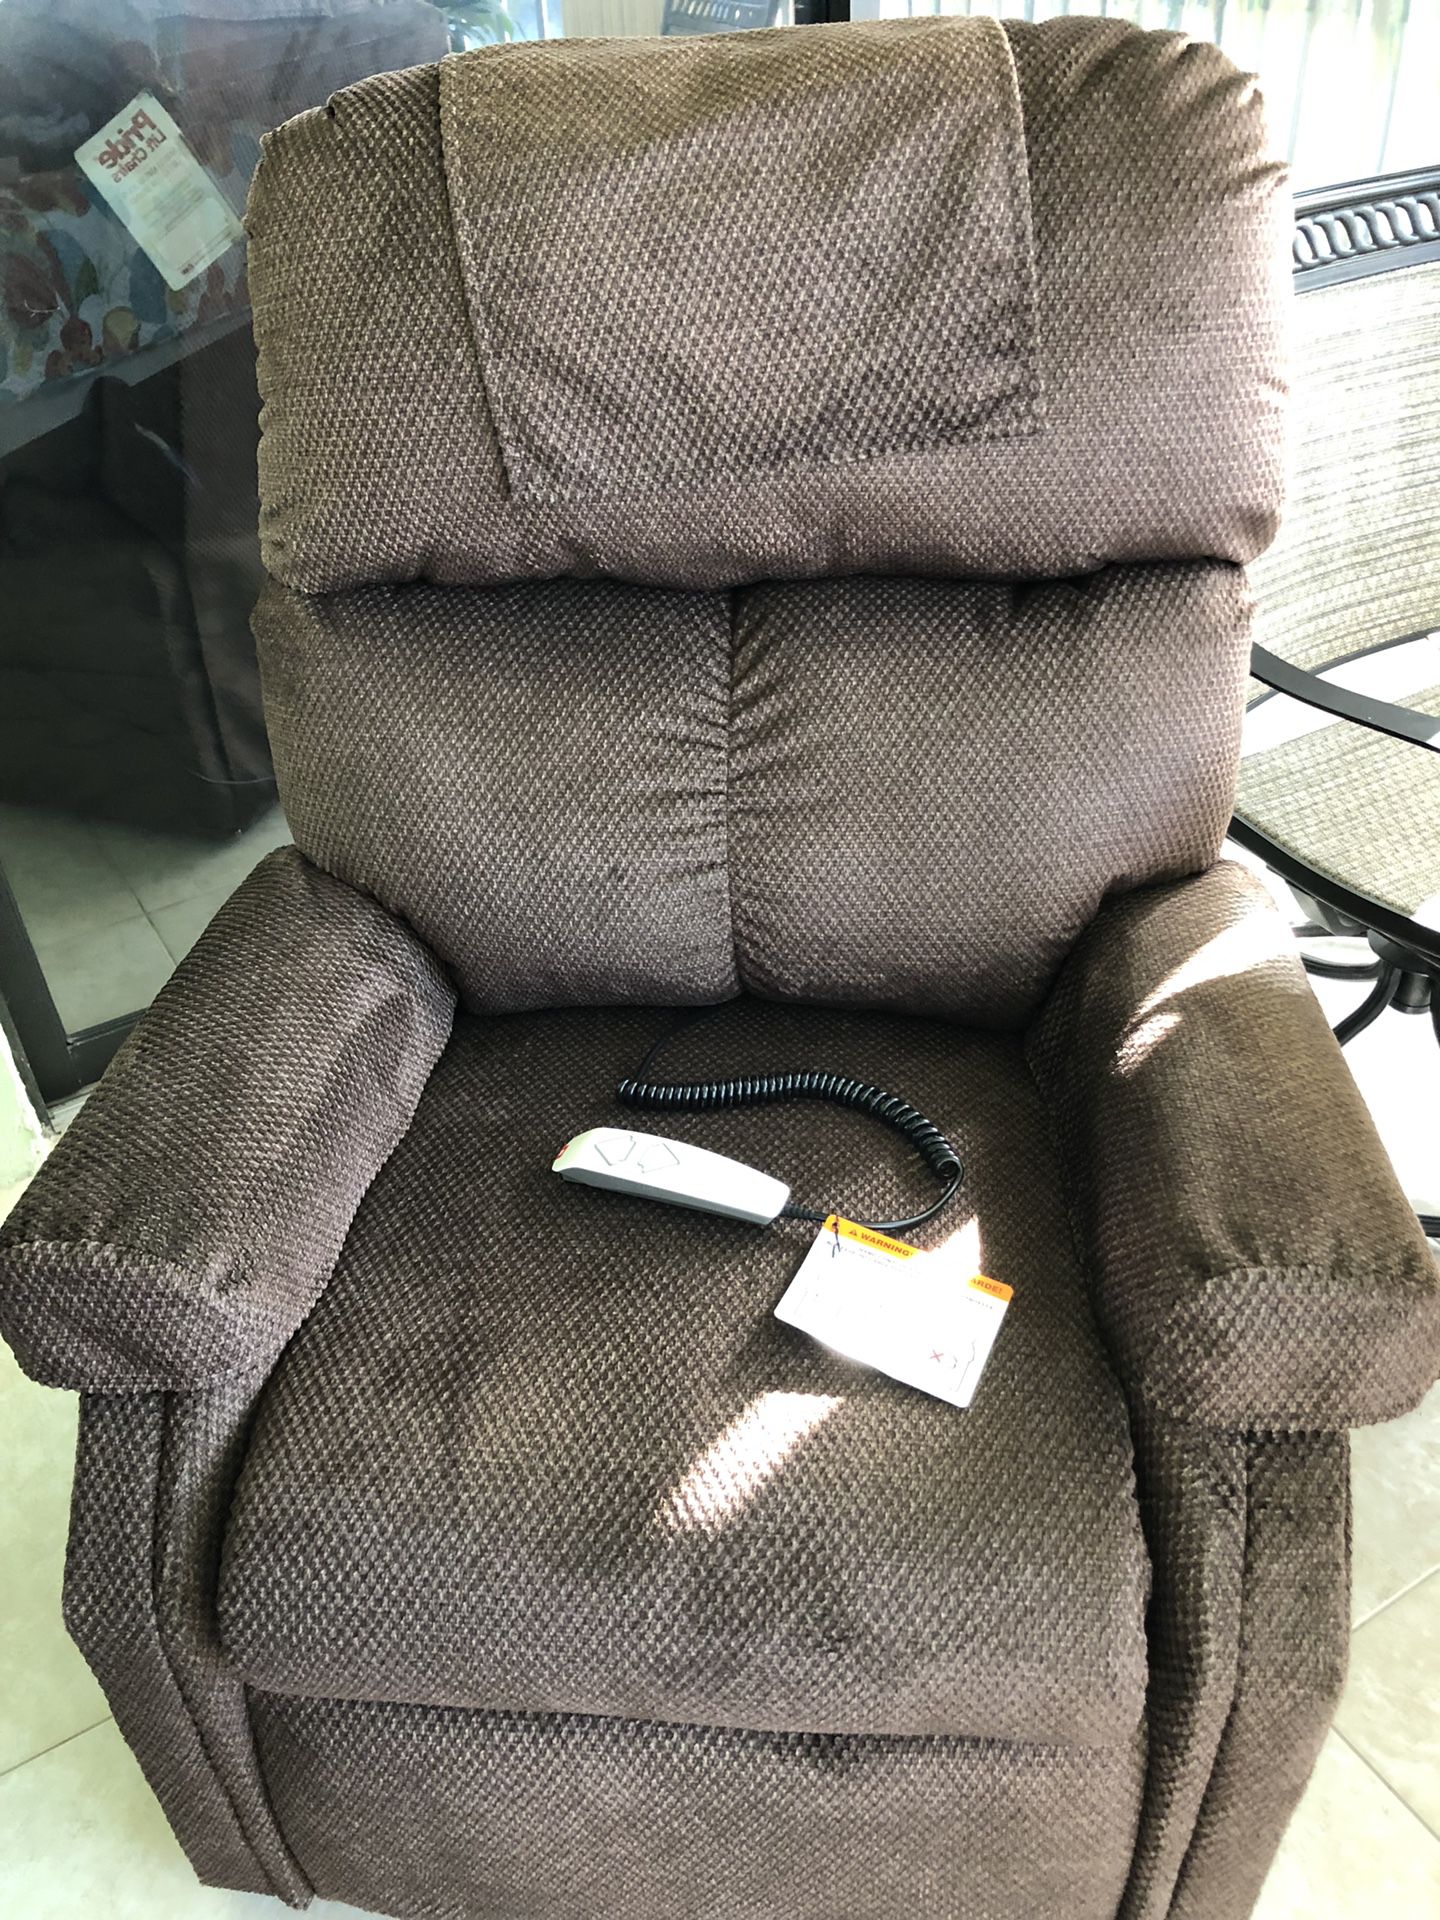 Pride-Lift Chair (Brand New/Never Used)